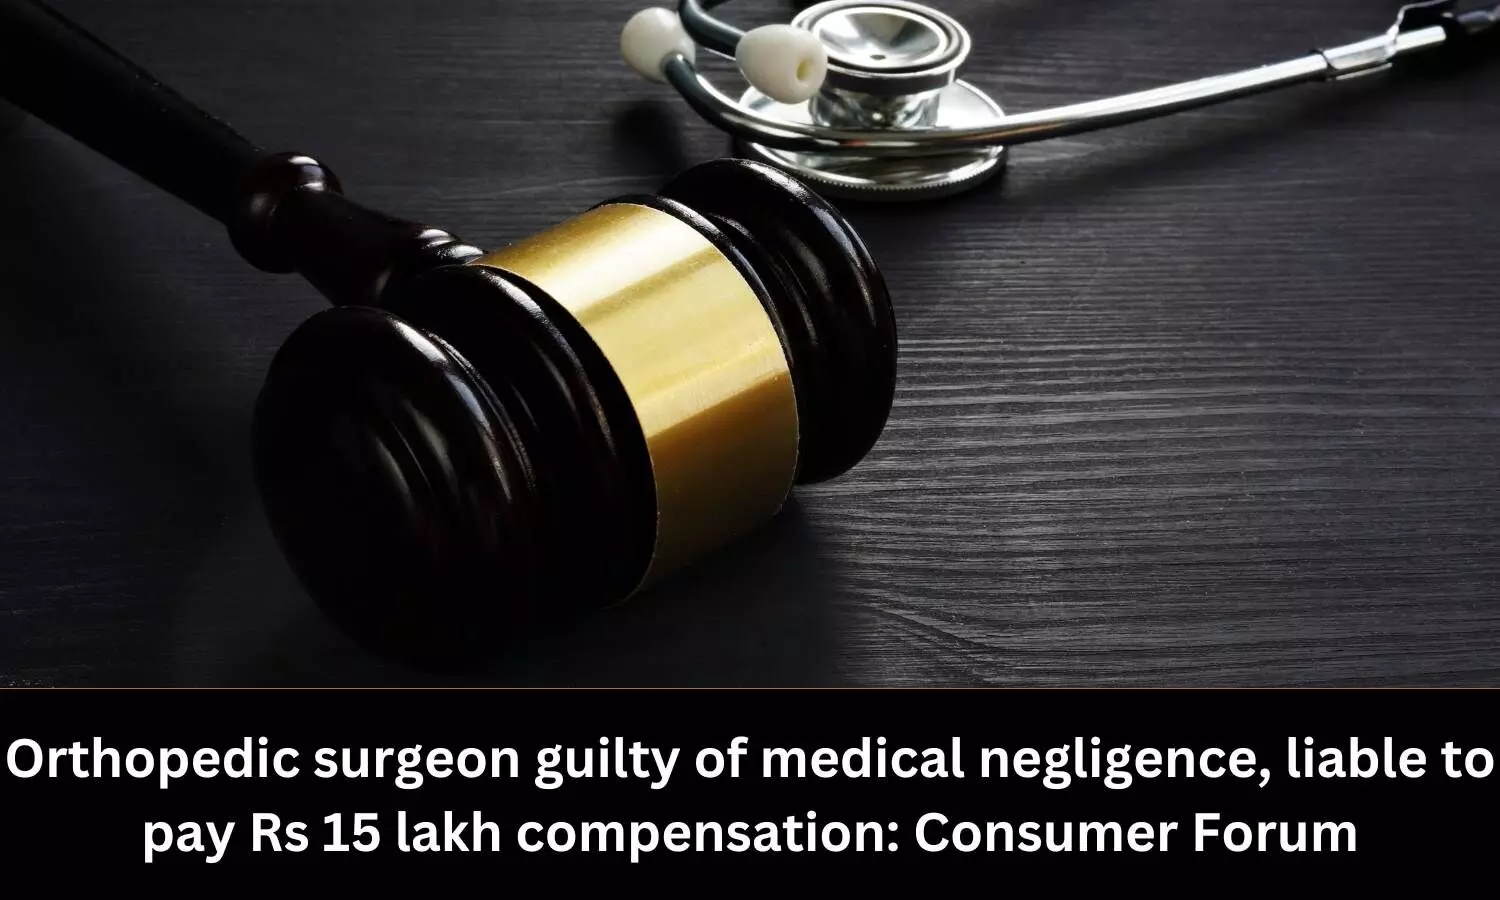 Orthopaedic surgeon guilty of medical negligence, liable to pay Rs 15 lakh compensation: Consumer Forum